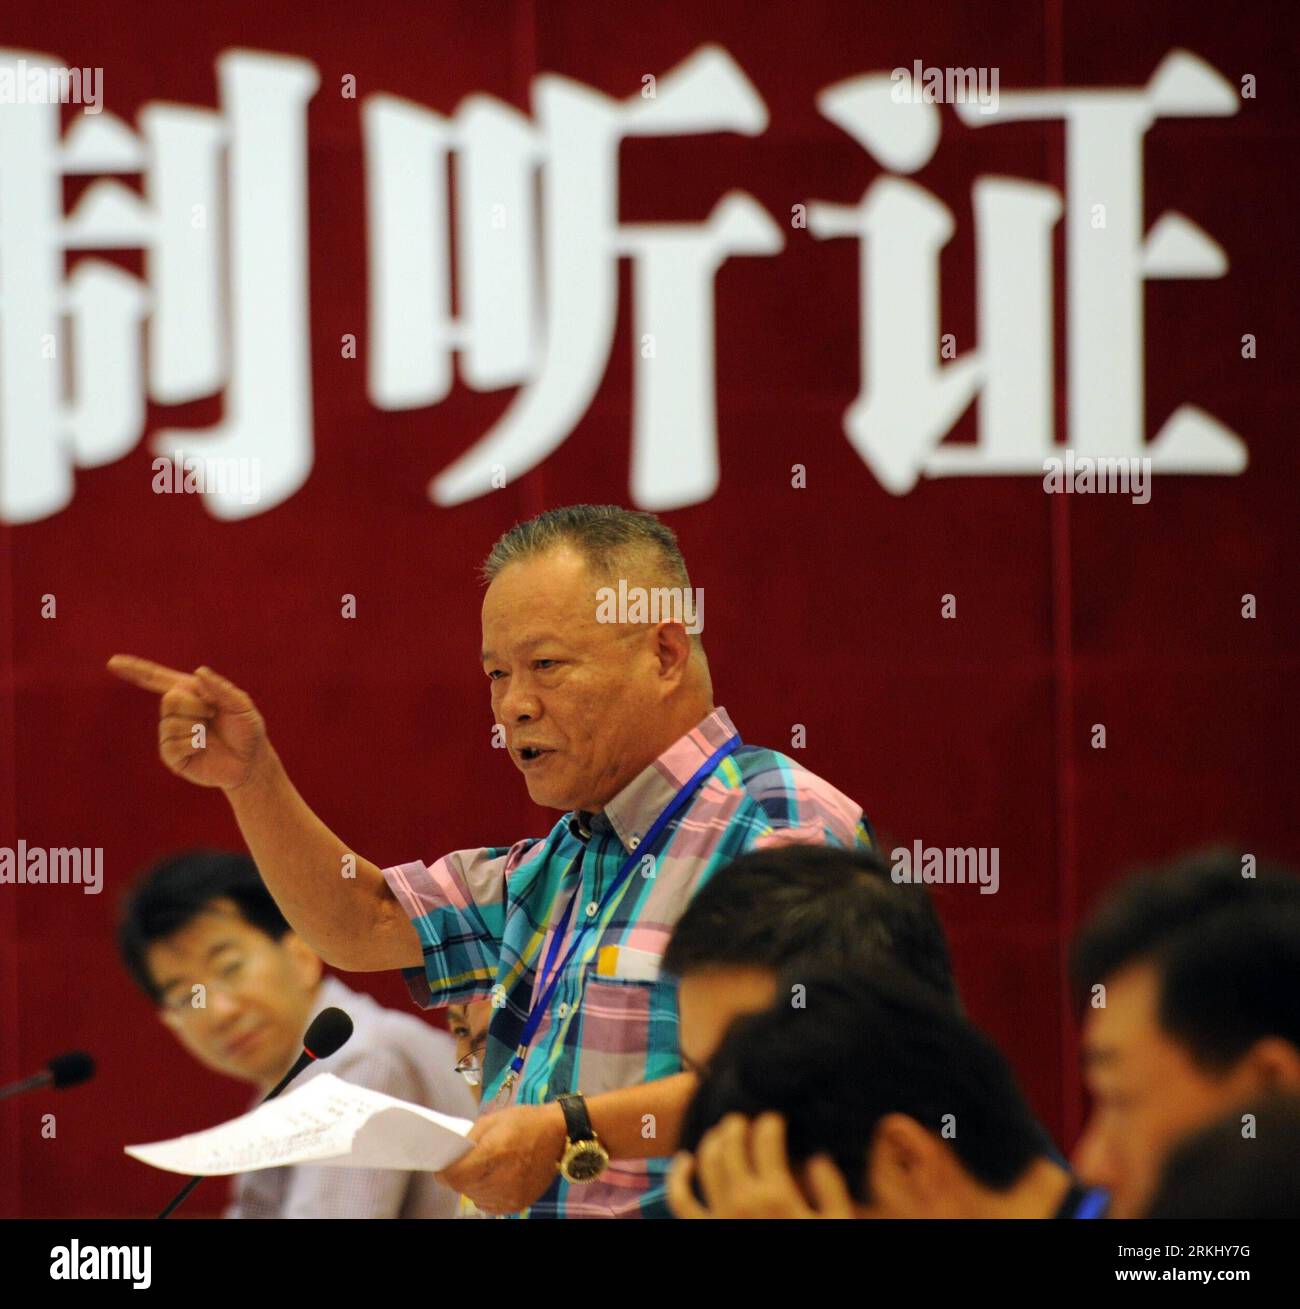 Bildnummer: 55932484  Datum: 09.09.2011  Copyright: imago/Xinhua (110909) -- HANGZHOU, Sept. 9, 2011 (Xinhua) -- Cui Yansheng, on behalf of the customers, speaks at a public hearing to hike taxi fares in Hangzhou, capital of east China s Zhejiang Province. The hearing, held as a result of a massive cab driver strike in August, will review two proposals which differ in the scale of increases in the flag-down fare and the metered fare. (Xinhua/Han Chuanhao) (llp) CHINA-HANGZHOU-TAXI RATES-HEARING (CN) PUBLICATIONxNOTxINxCHN Gesellschaft x2x xtm 2011 quadrat  o0 öffentliche Anhörung, Streik, Taxi Stock Photo